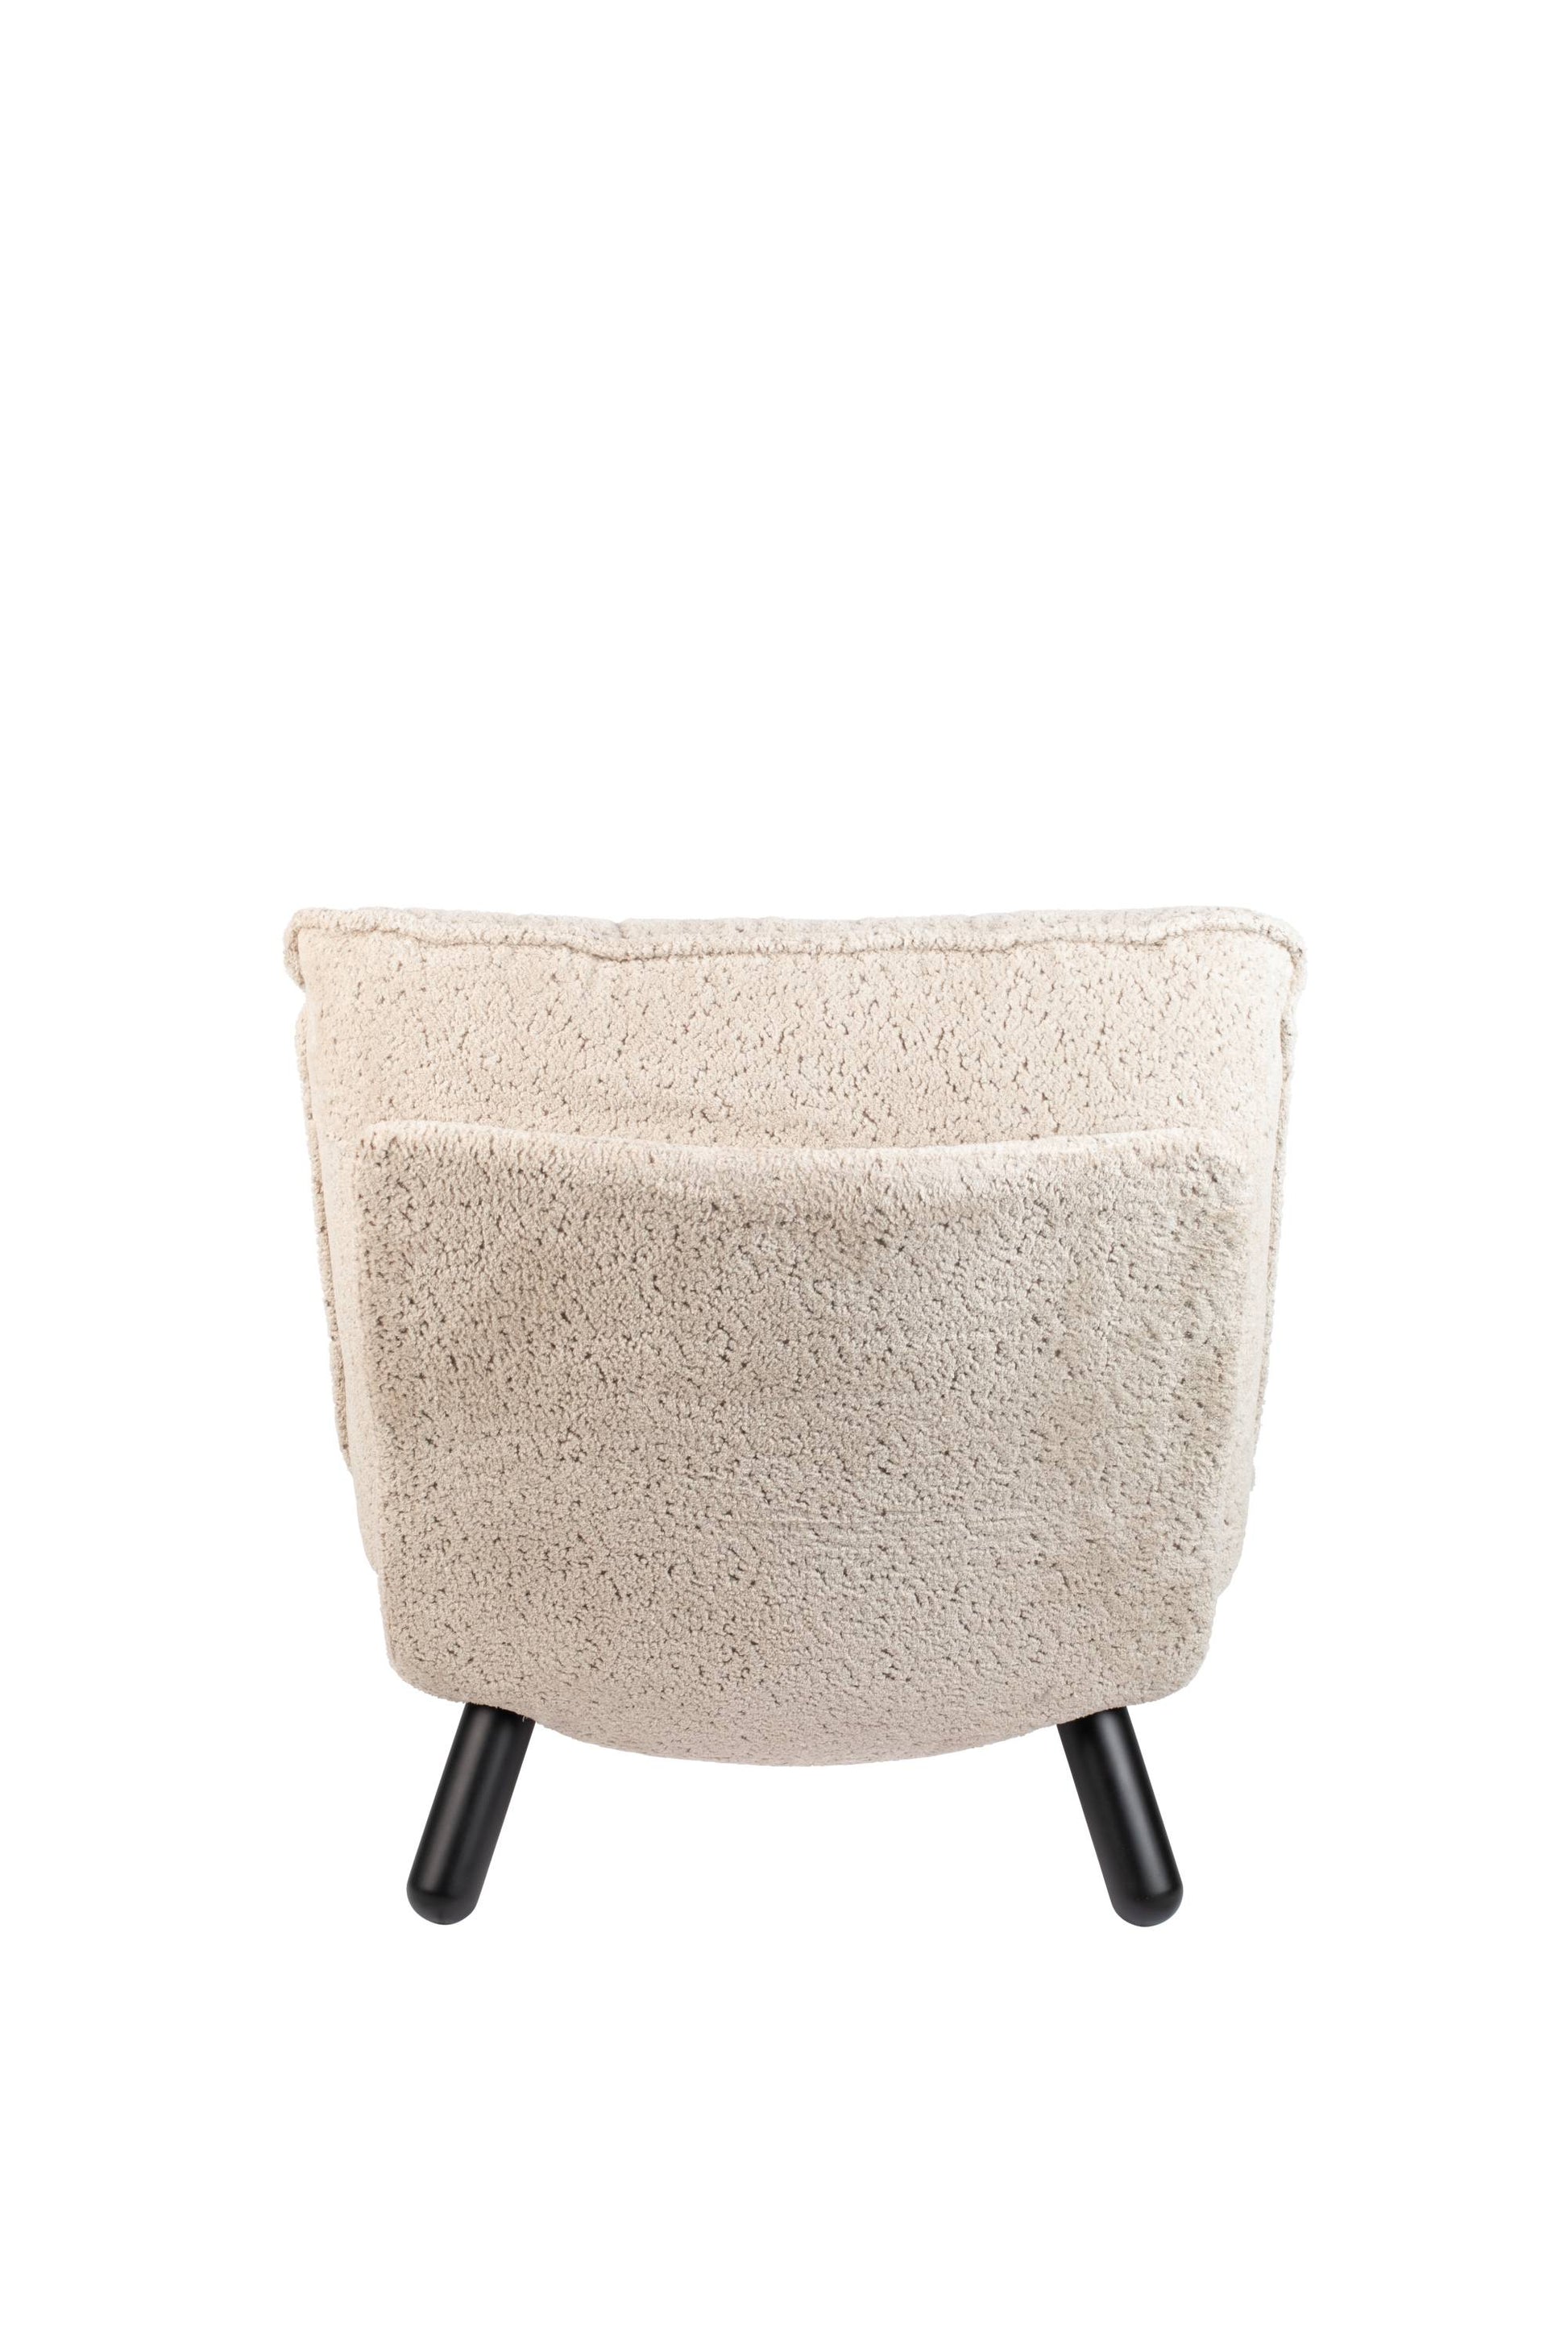 Zuiver | LOUNGE CHAIR LAZY SACK TEDDY Default Title